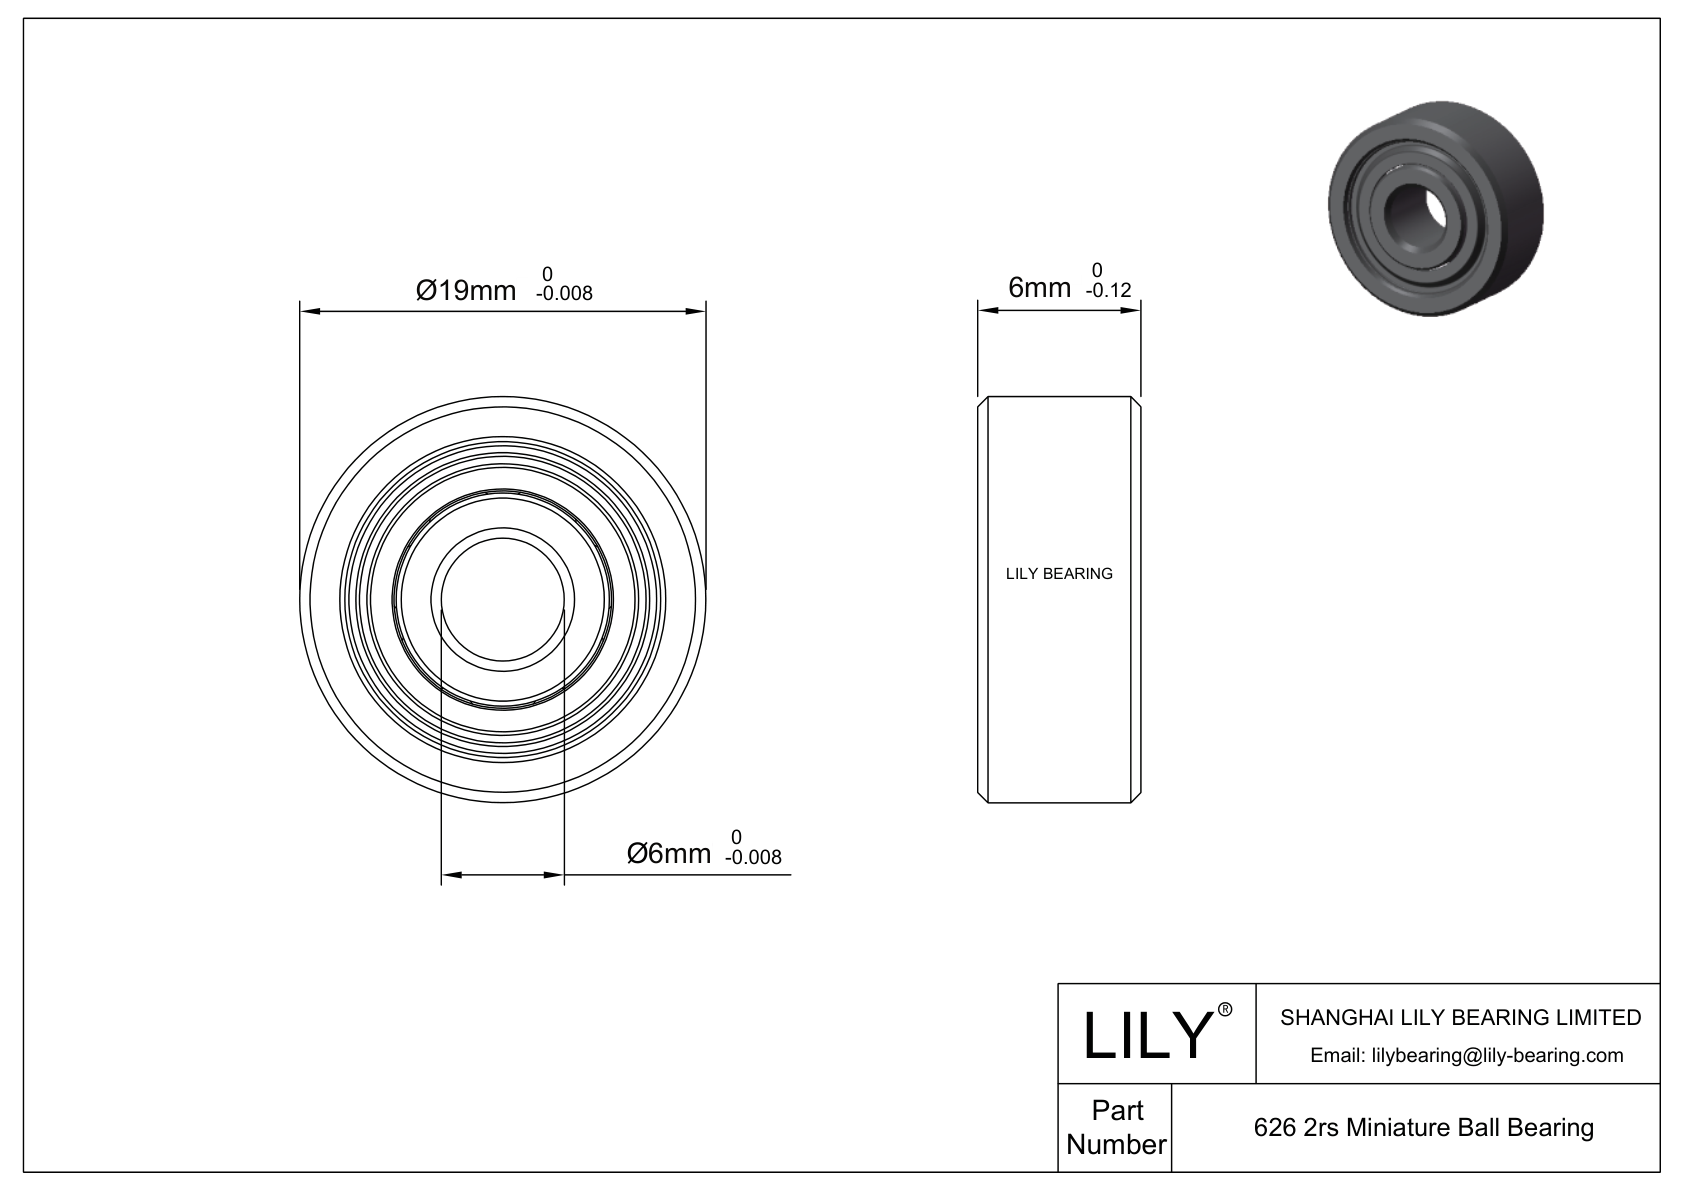 LILY-PUT62640-30C1L9M5 Outsourcing Polyurethane Coated Bearing With Screw cad drawing